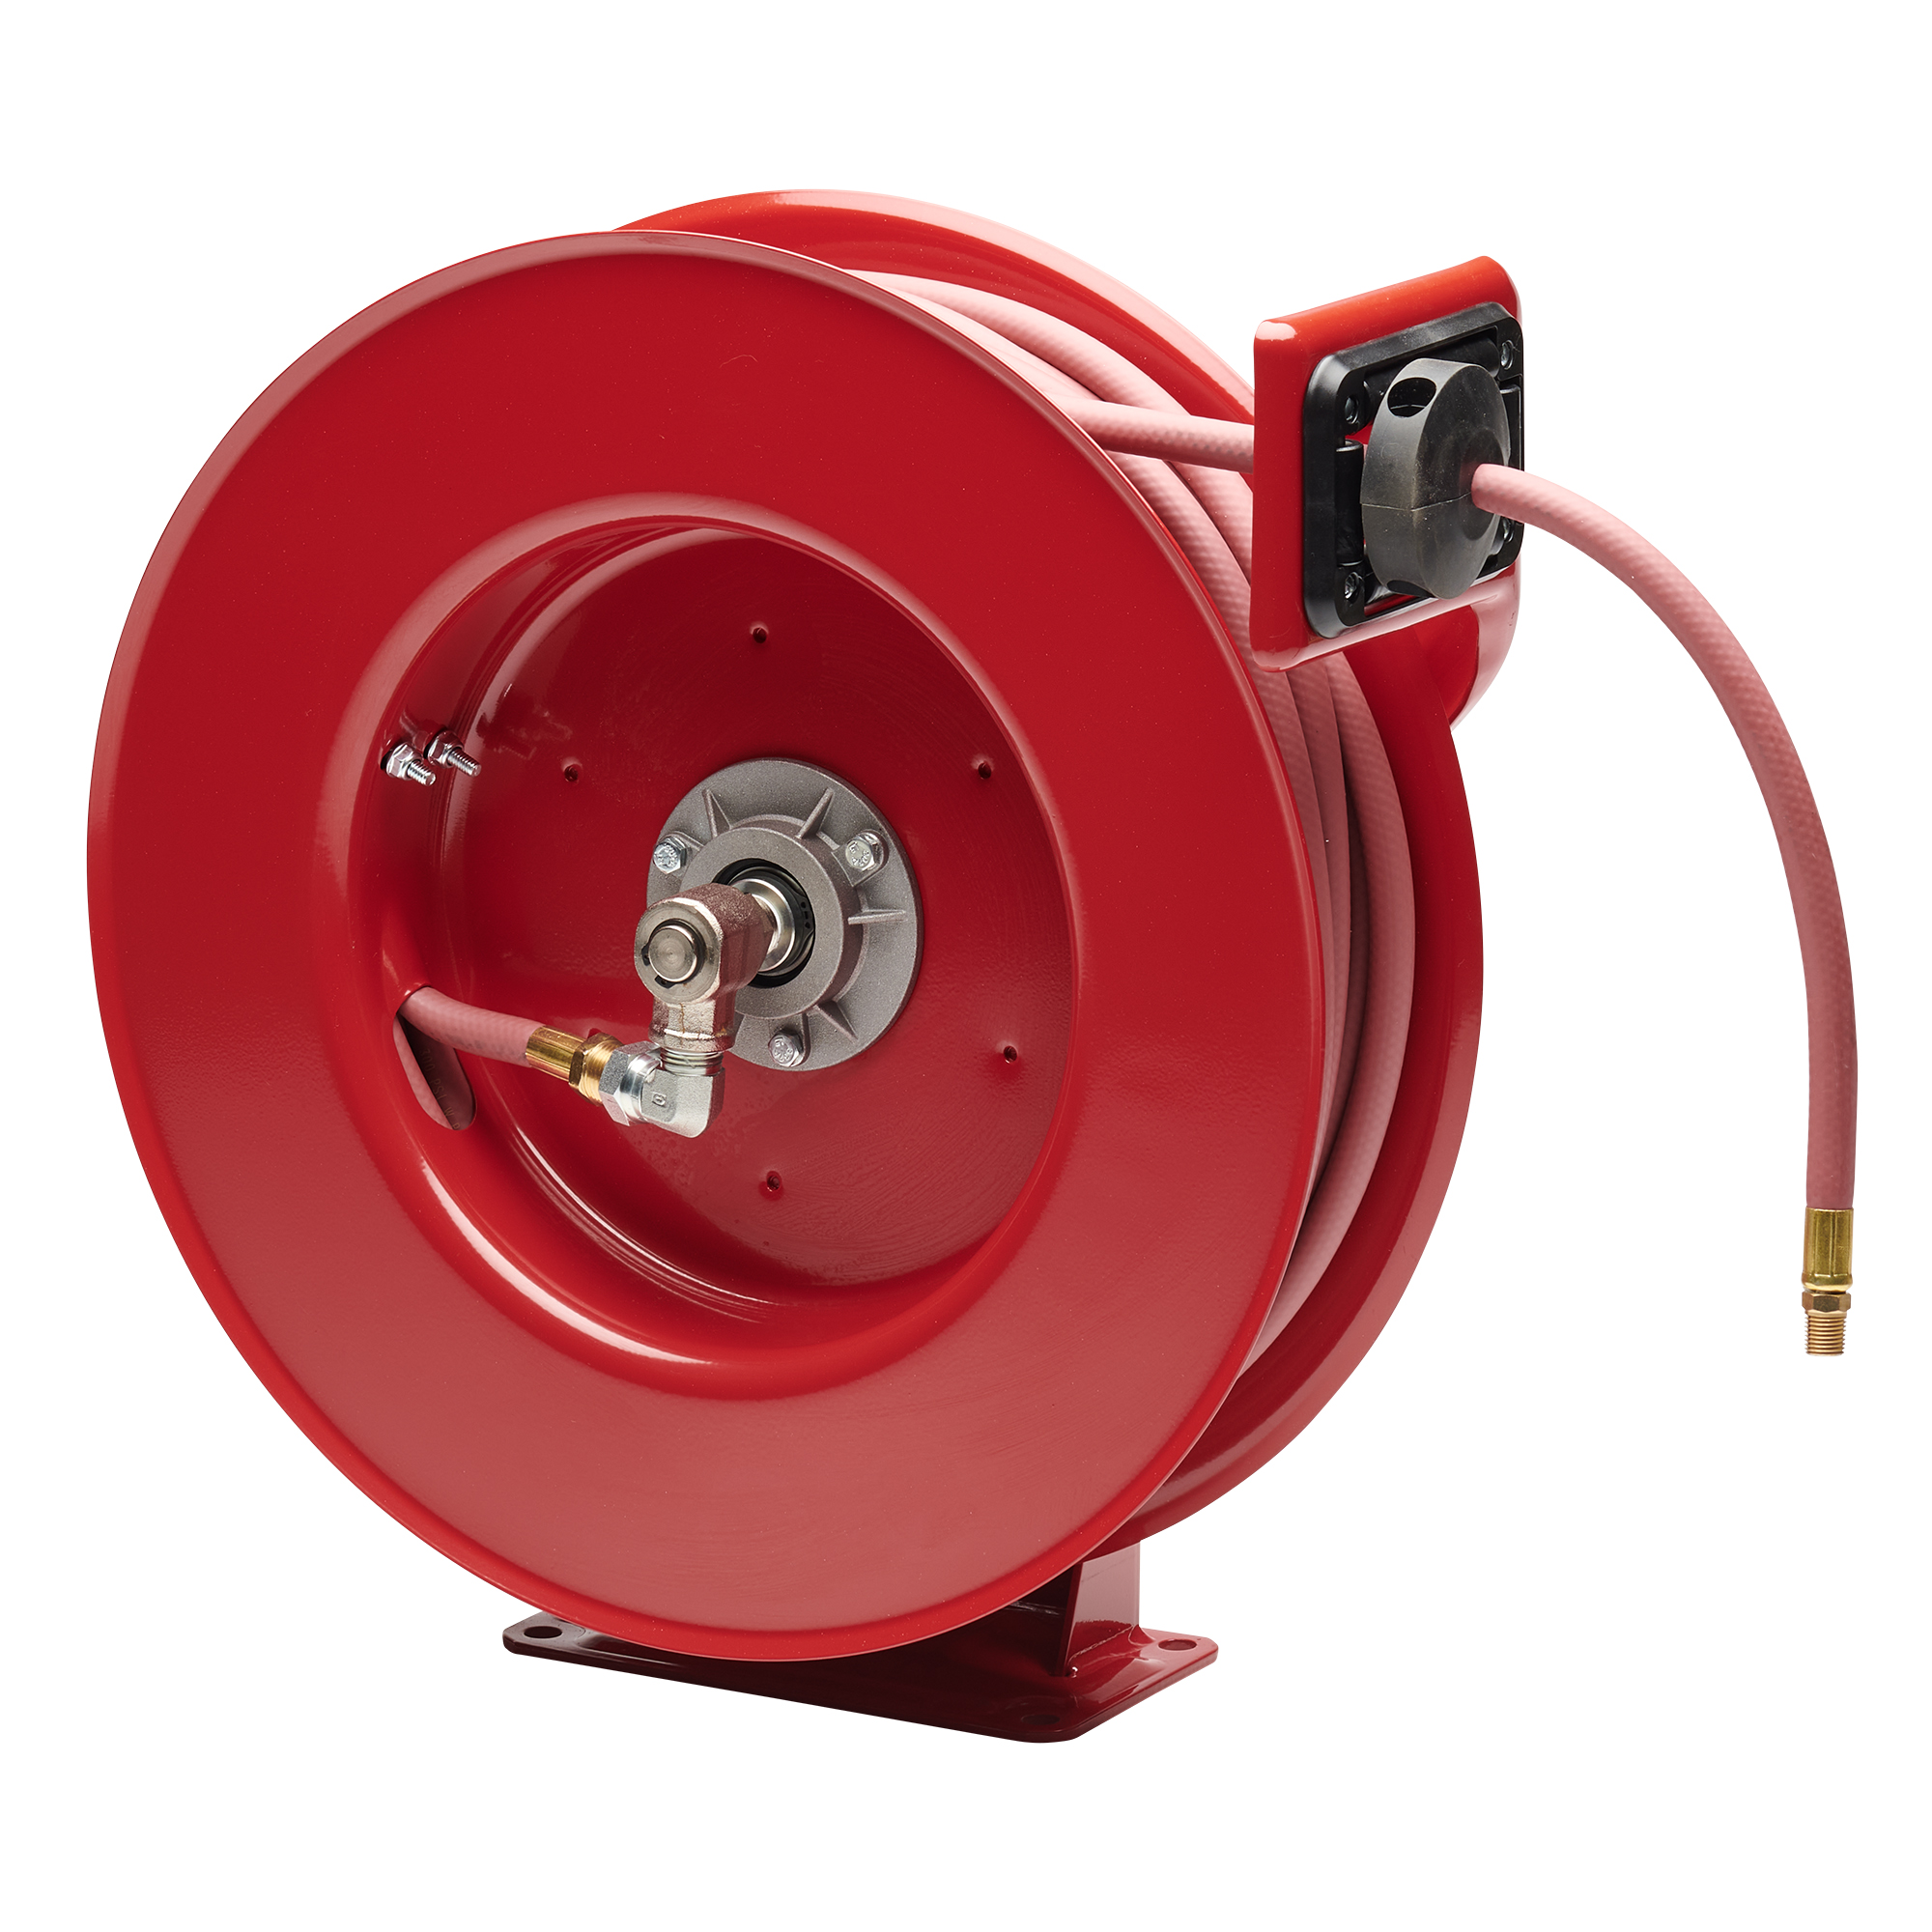 Reelcraft Air Hose Reel With Hose — 3/8in. x 75ft. Hose, Max. 300